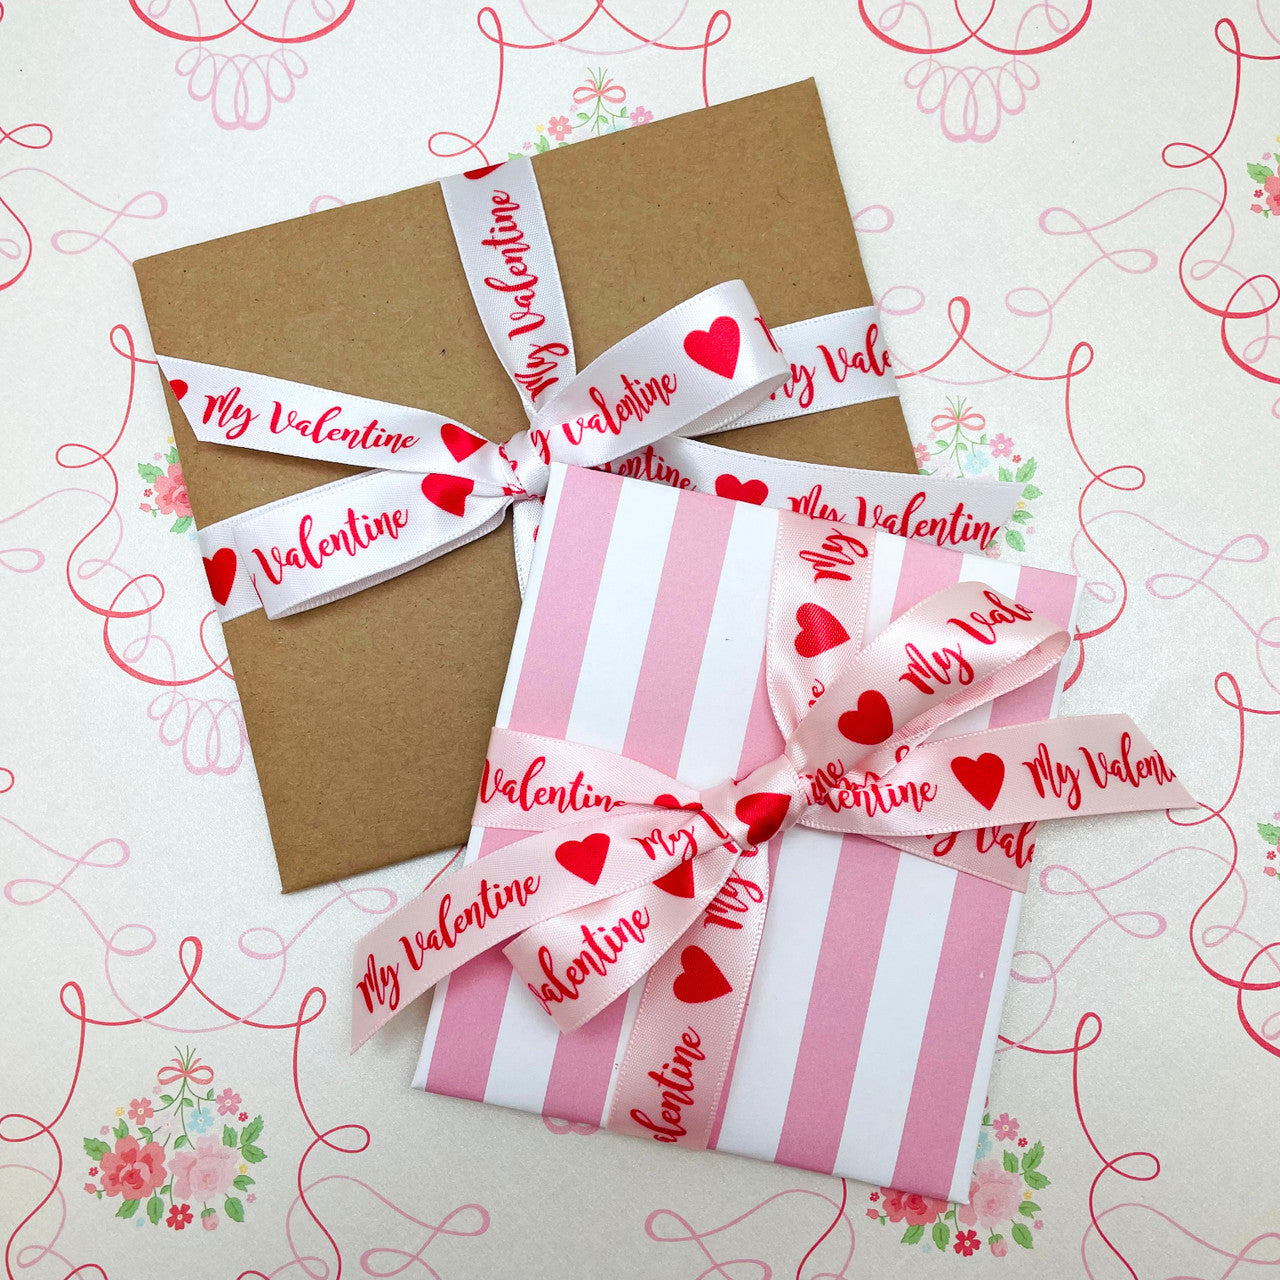 My Valentine ribbon is offered on two colors for the perfect Valentine gift wrap for all your Valentines.